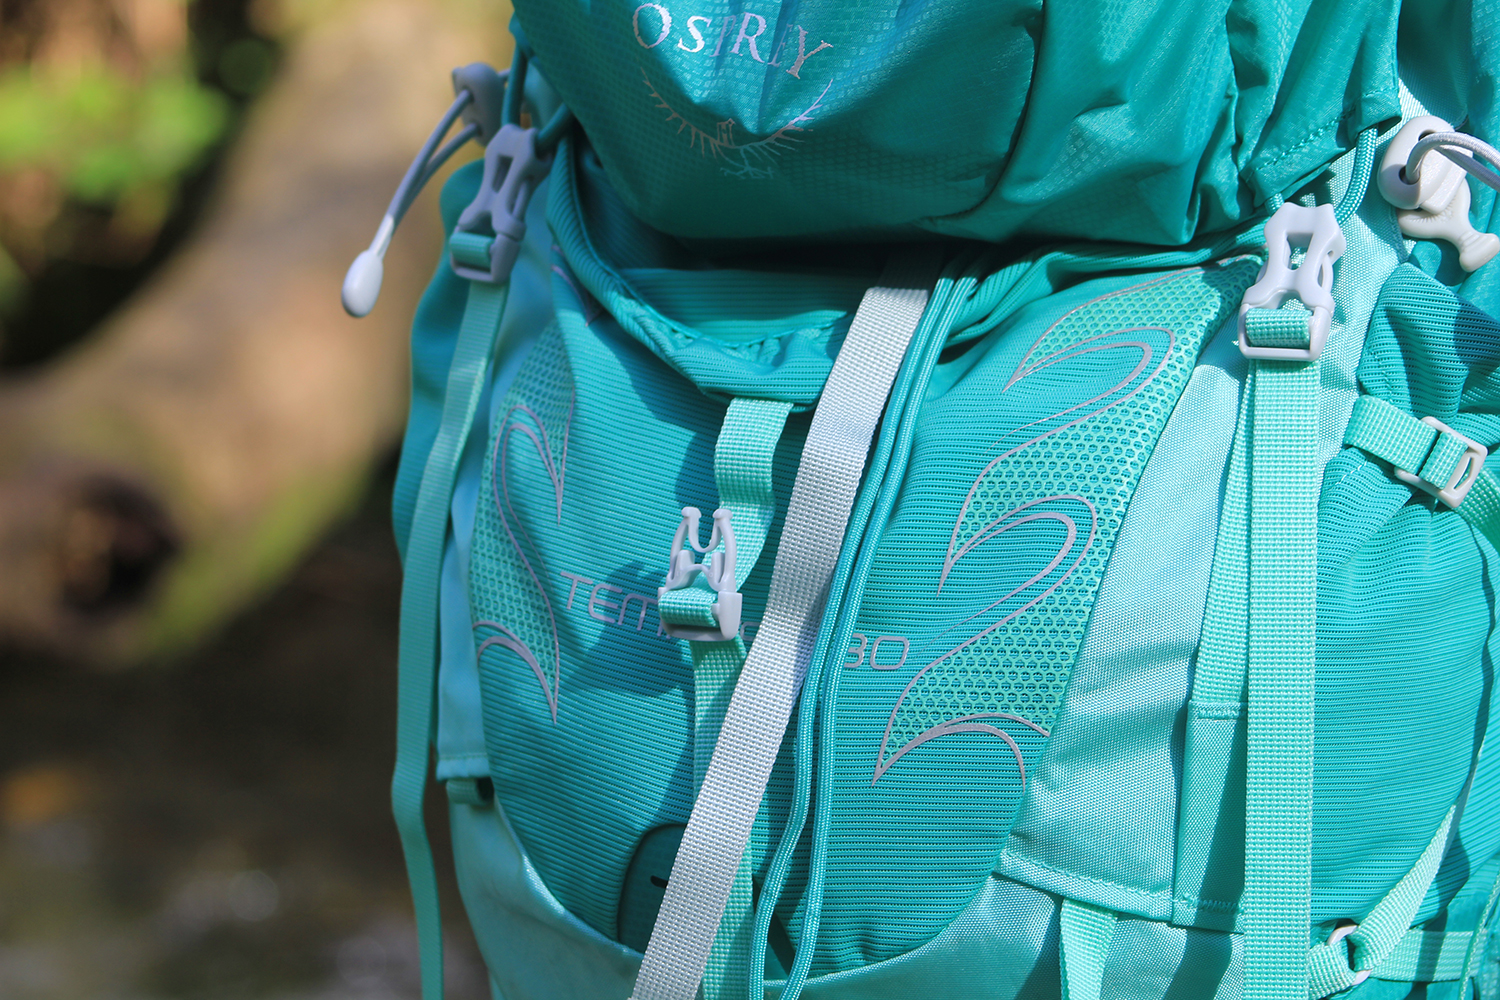 Reviewing The Osprey Womens Tempest 30ltr Hiking Backpack